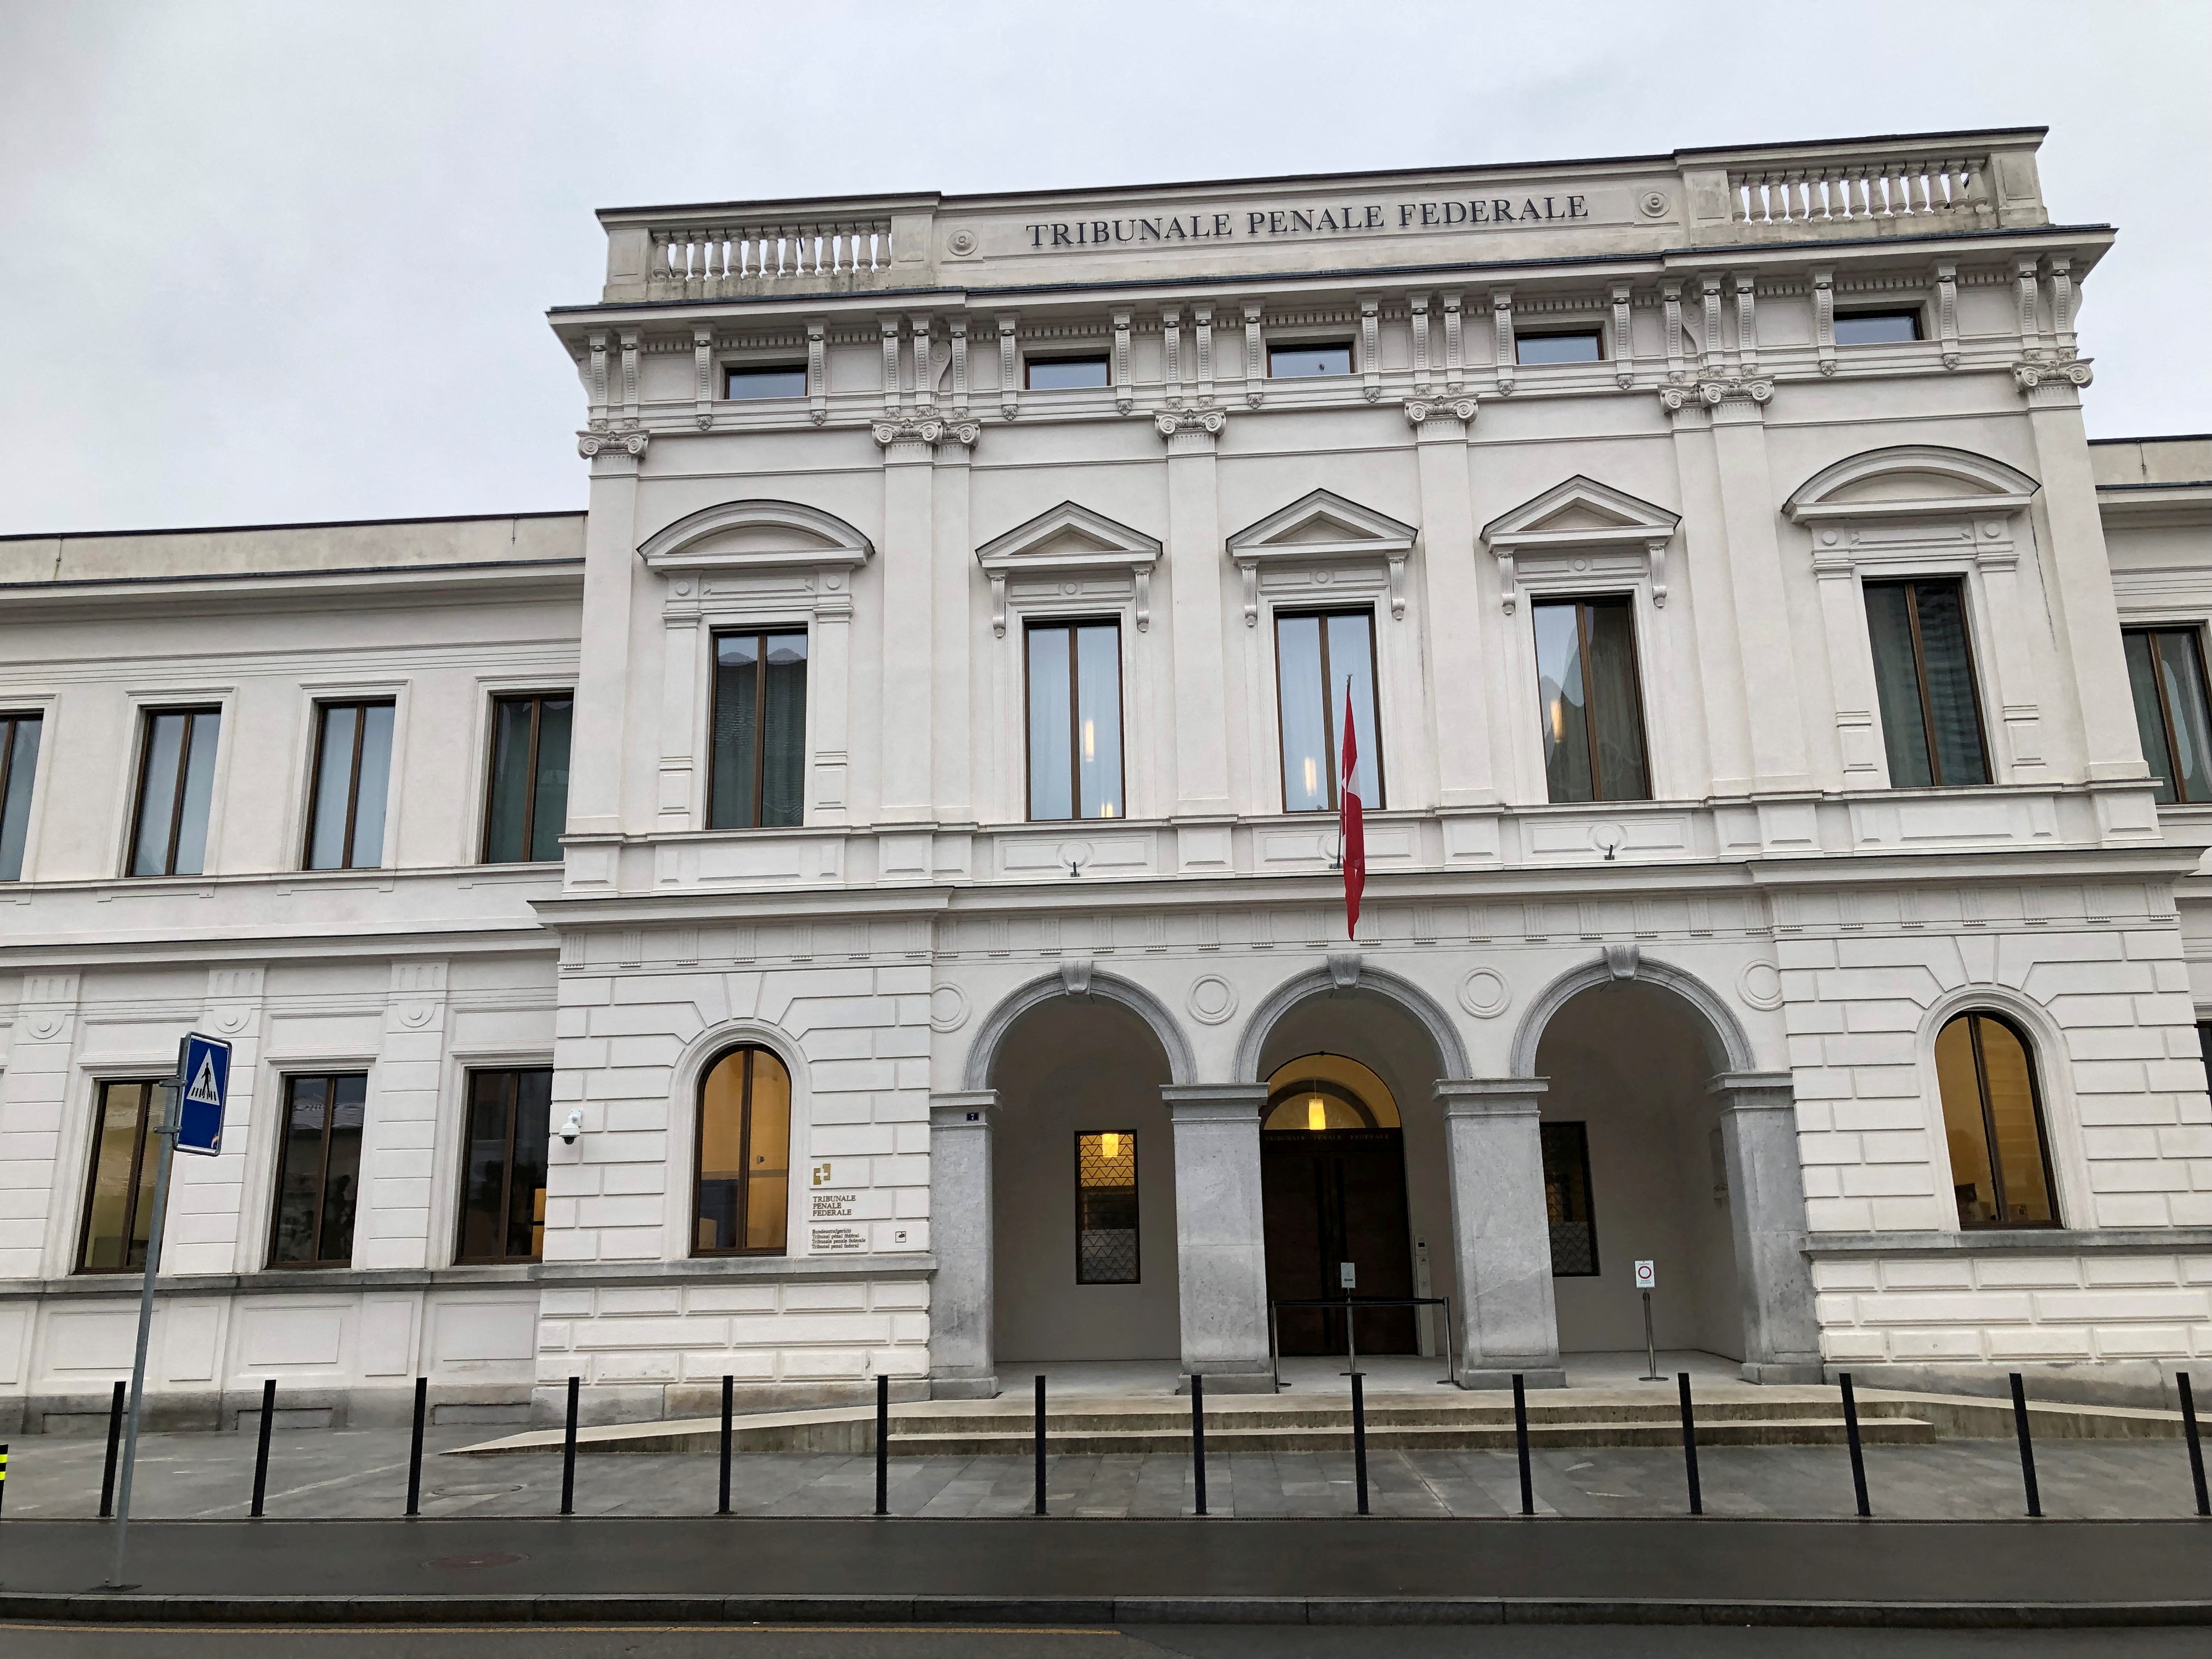 A view of the Swiss Federal Criminal Court in Bellinzona